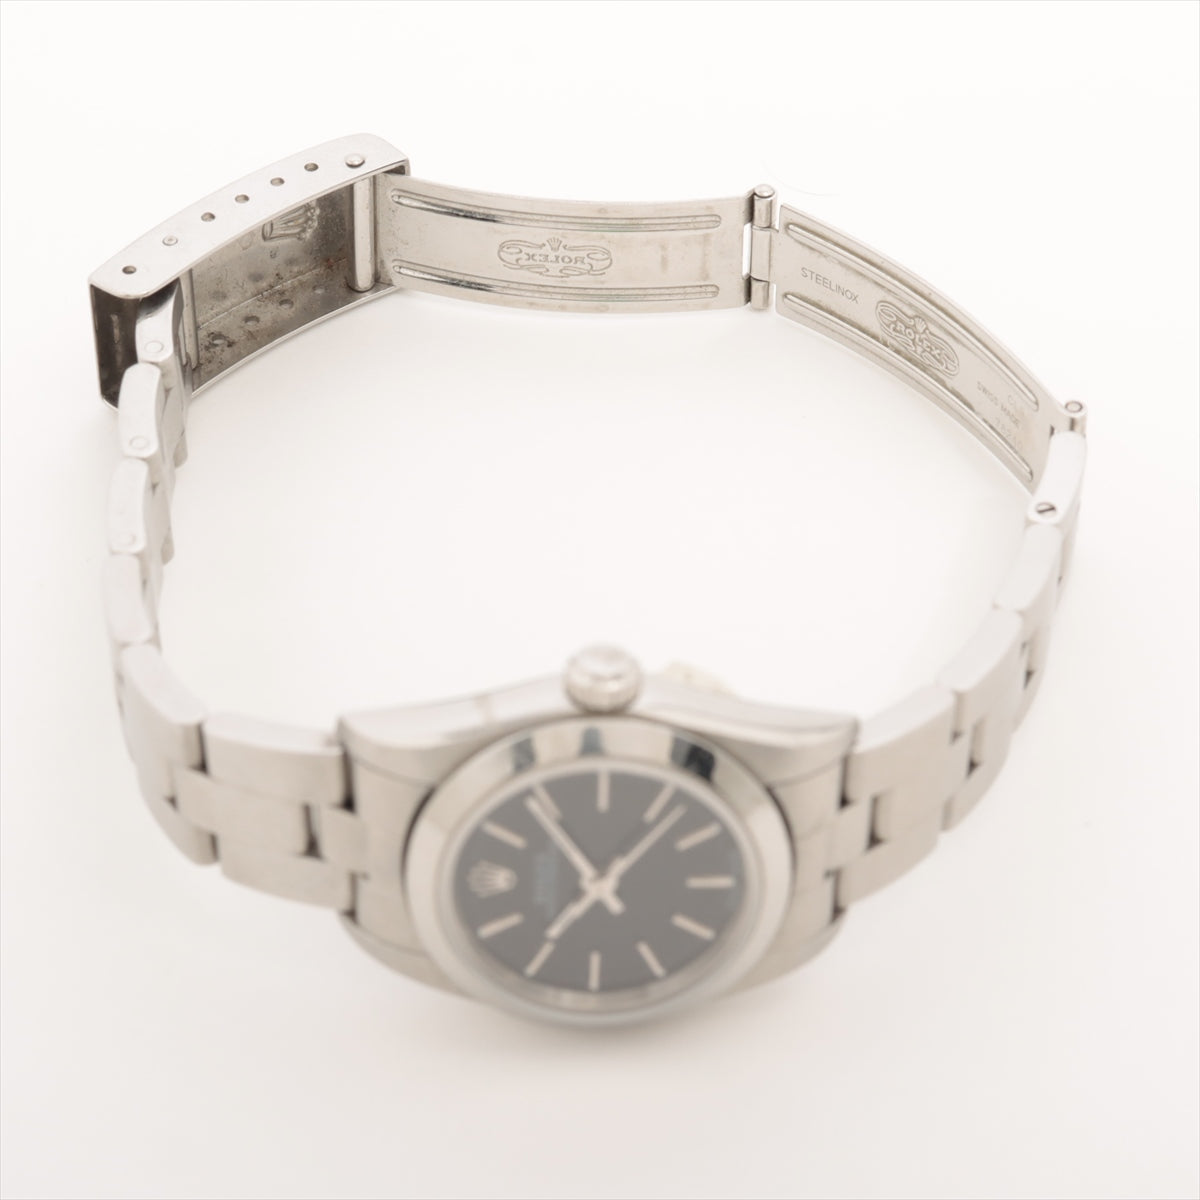 Rolex Oyster Perpetual 76080 SS AT Black